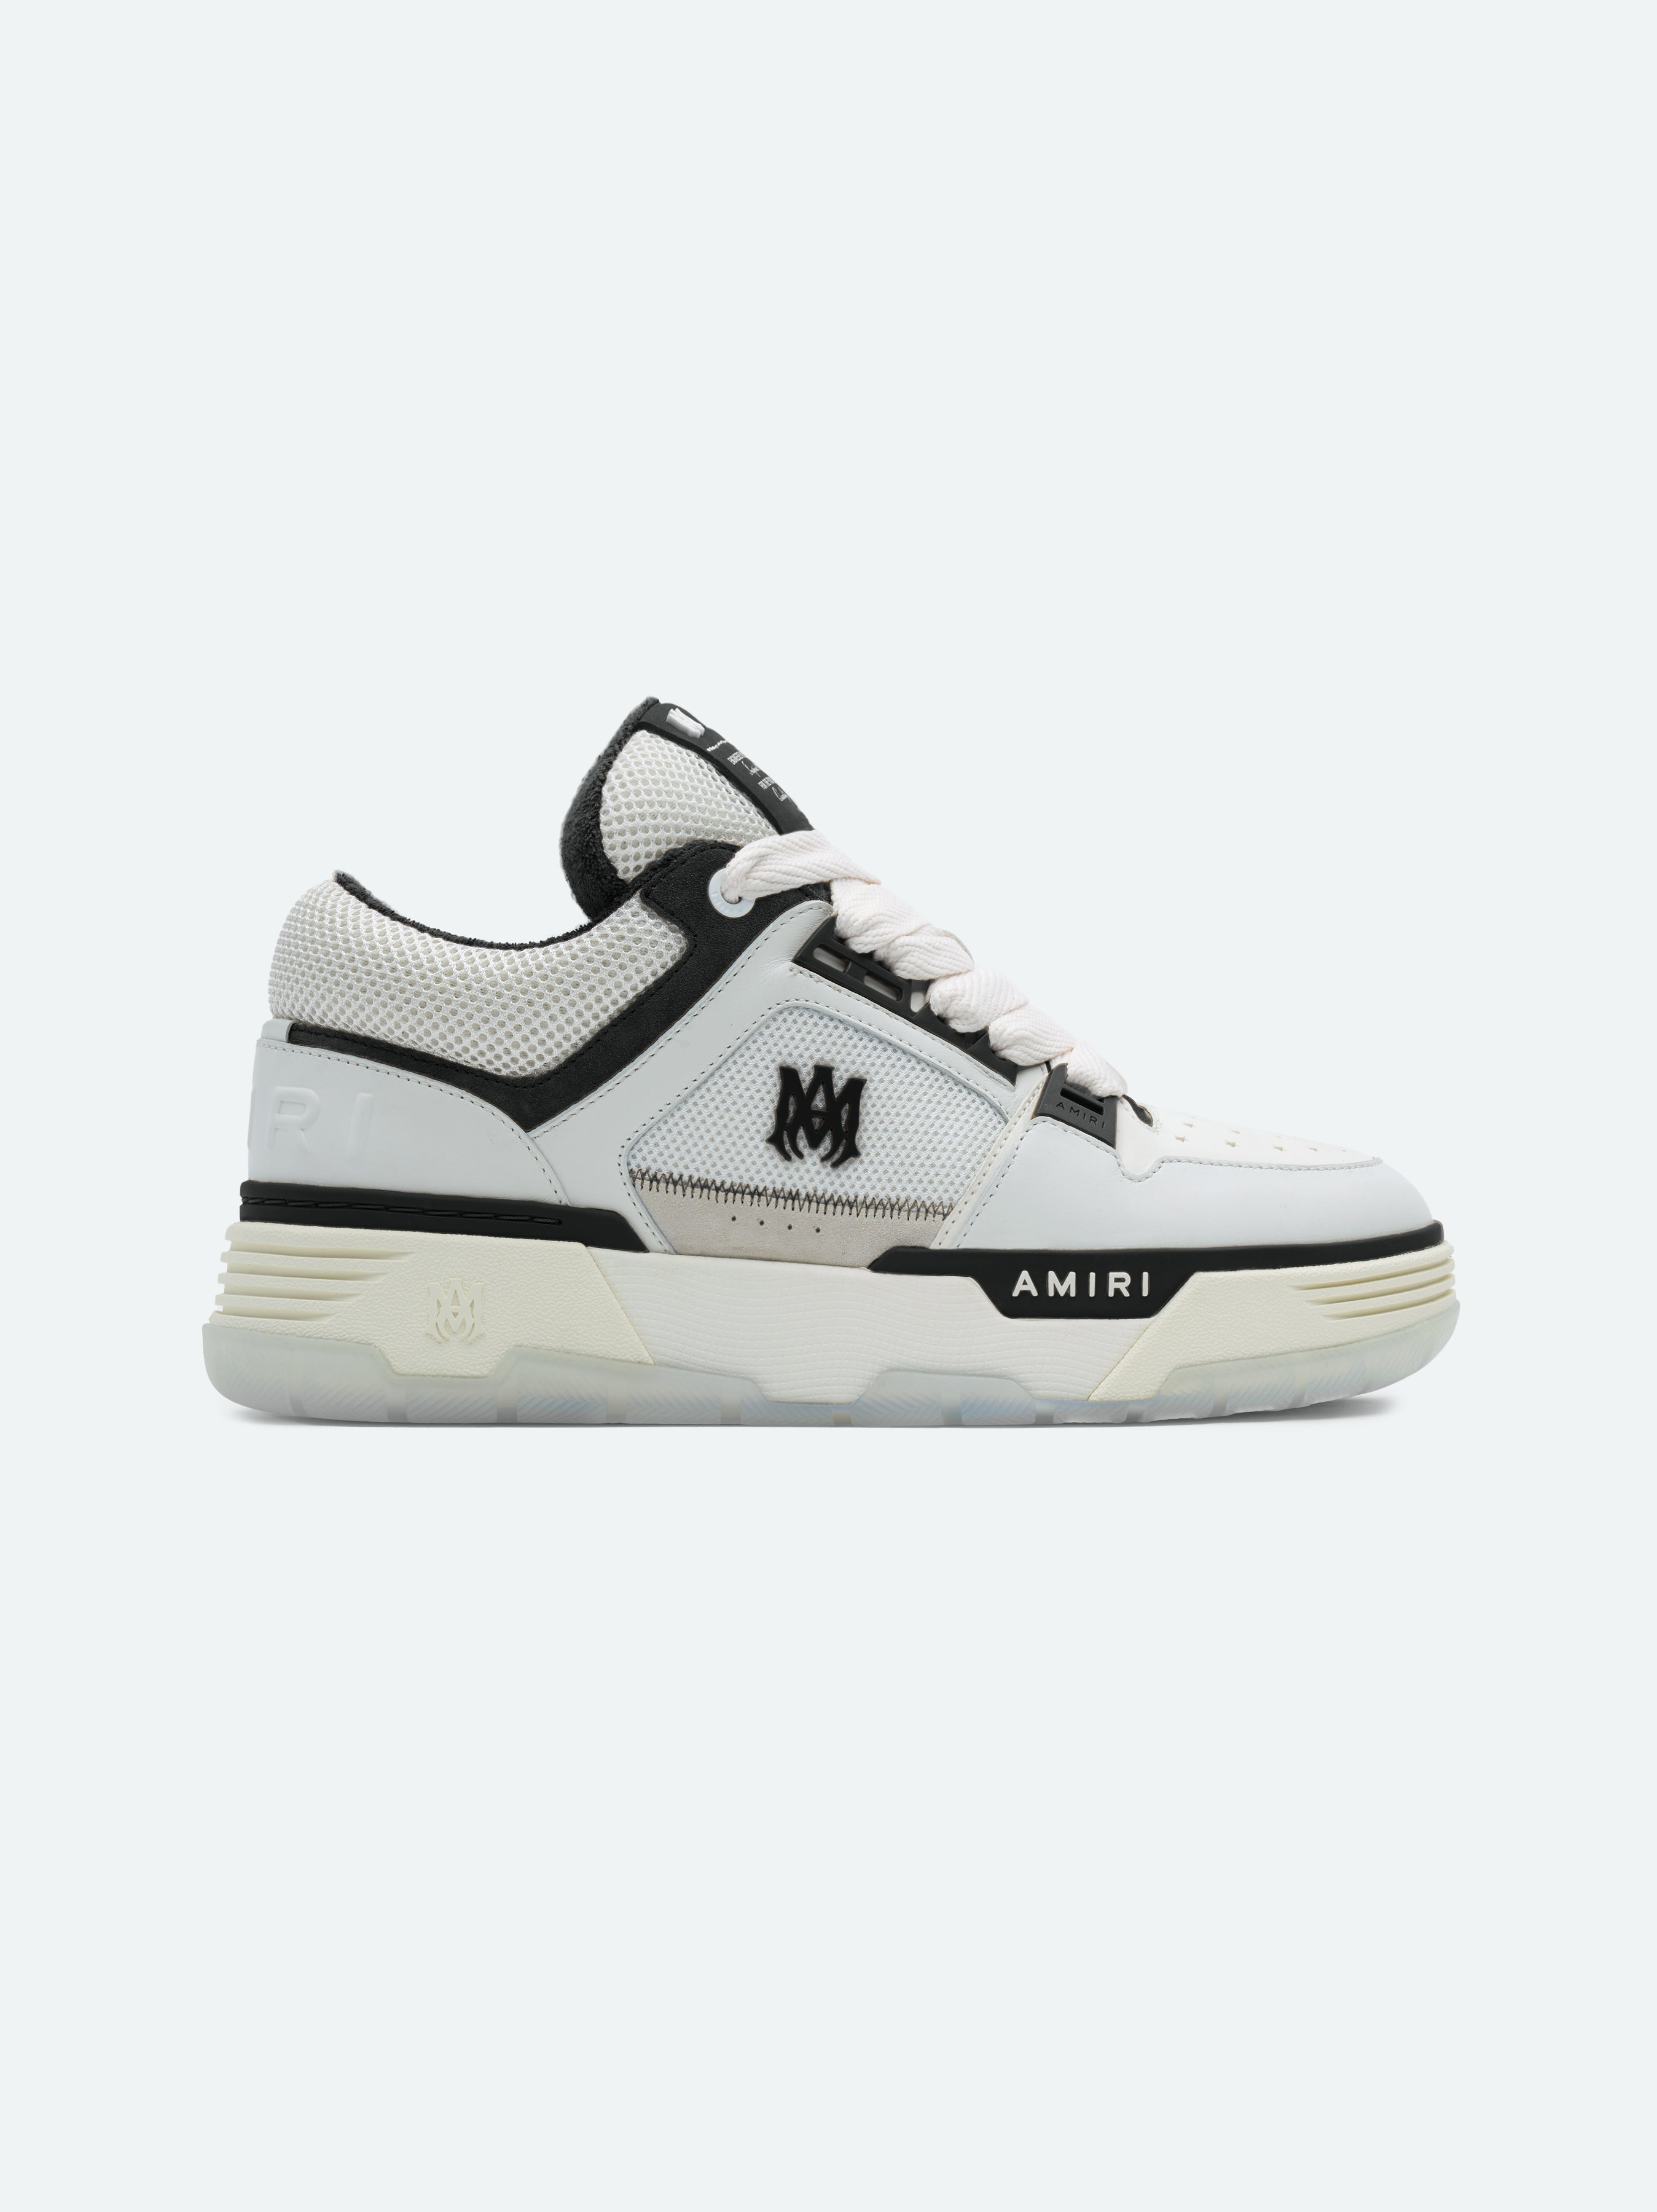 Product WOMEN -  WOMEN'S MA-1 - WHITE BLACK featured image